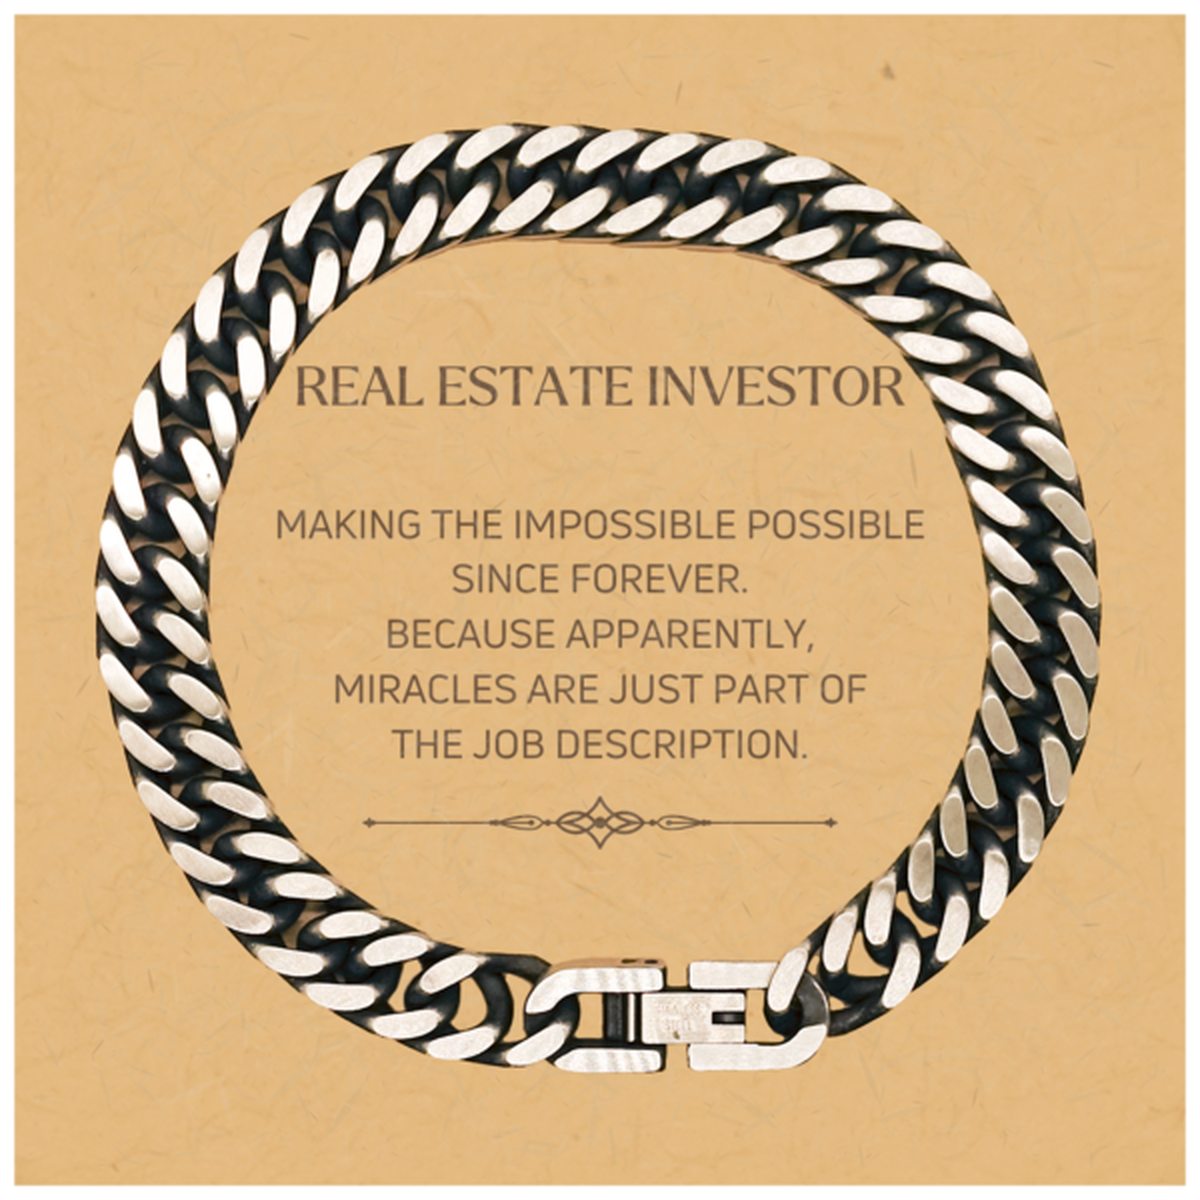 Funny Real Estate Investor Gifts, Miracles are just part of the job description, Inspirational Birthday Christmas Cuban Link Chain Bracelet For Real Estate Investor, Men, Women, Coworkers, Friends, Boss